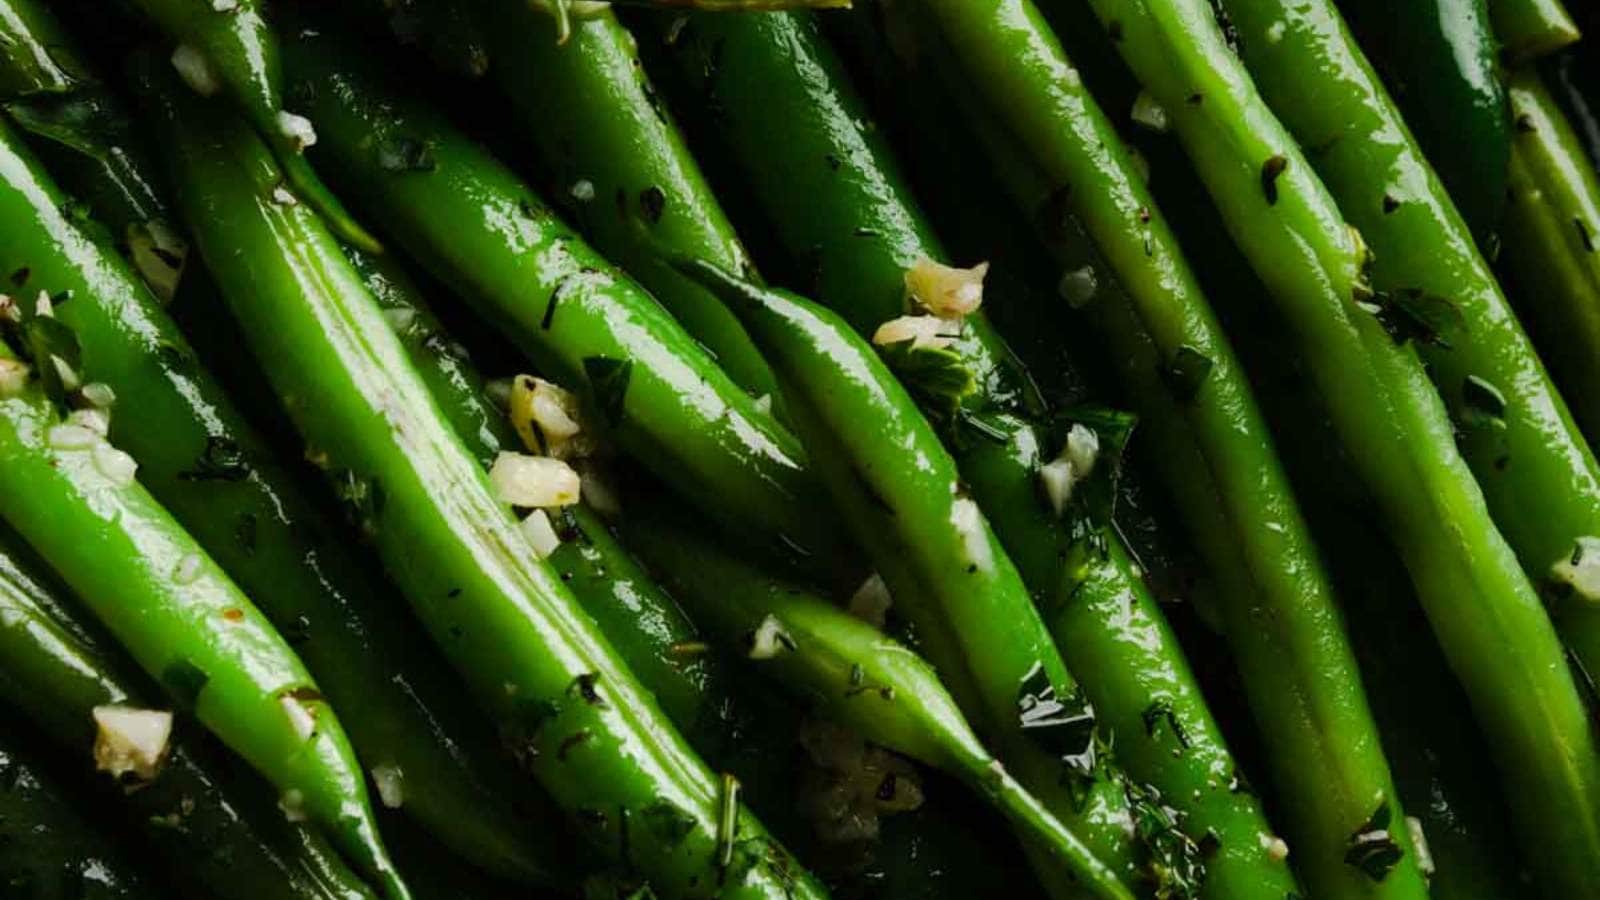 French Green Beans with Herb Butter recipe by The Sage Apron.